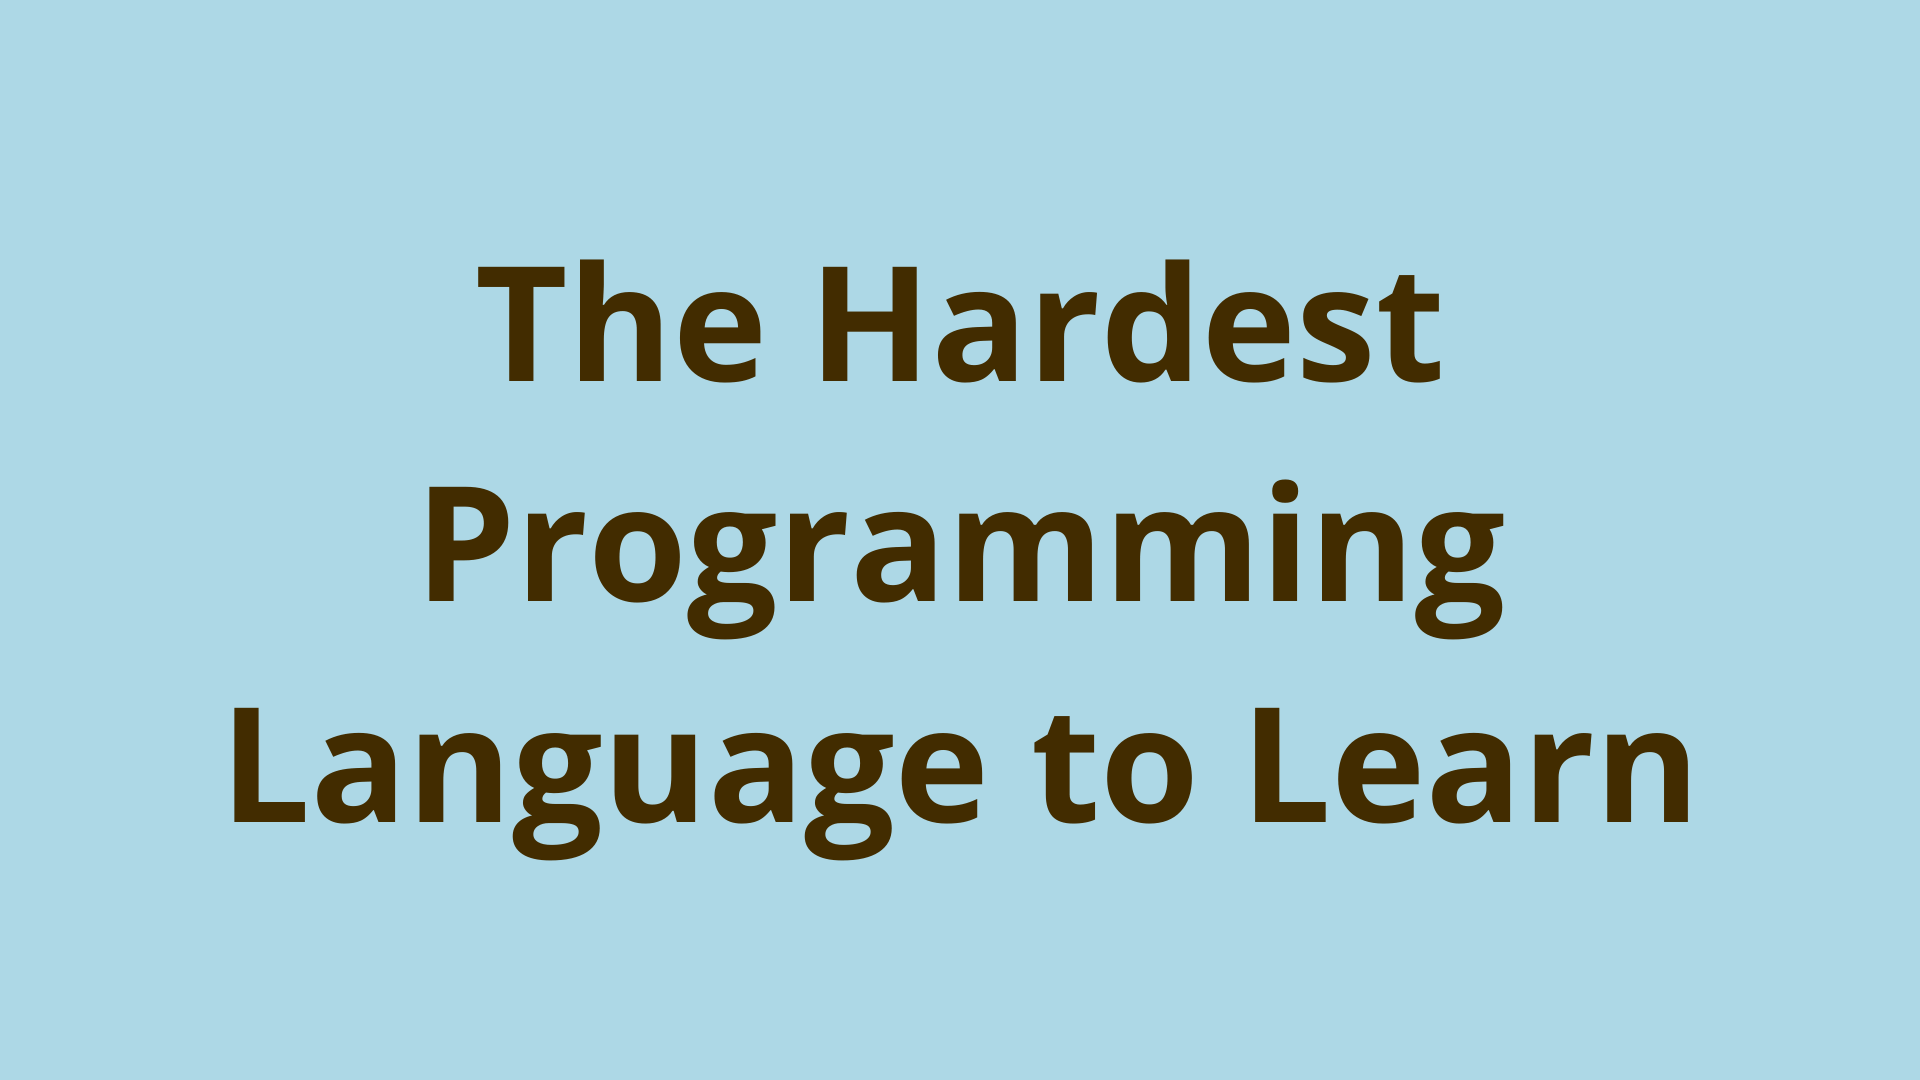 Image of What is the hardest programming language to learn?